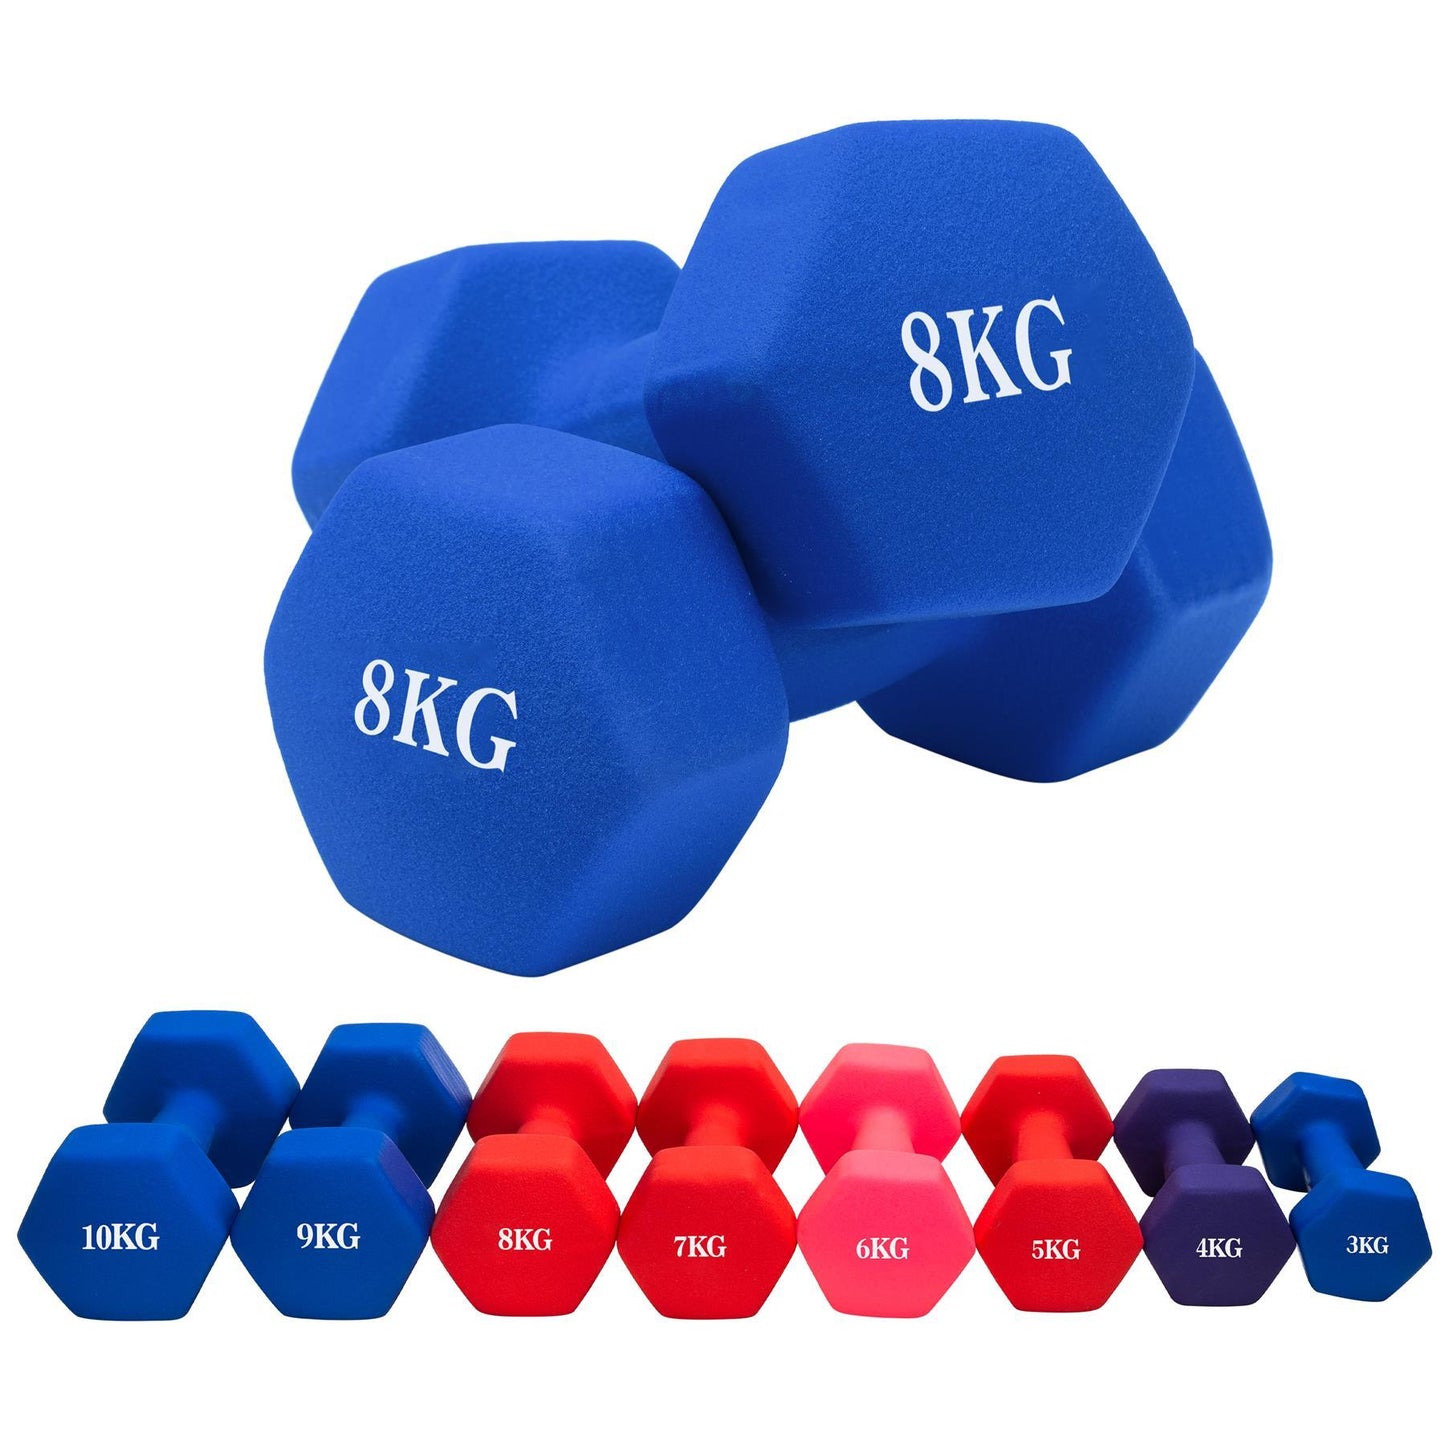 Weight Training Vinyl Dumbbell 8kg Assorted Colours 6628 A W25 (Big Parcel Rate)